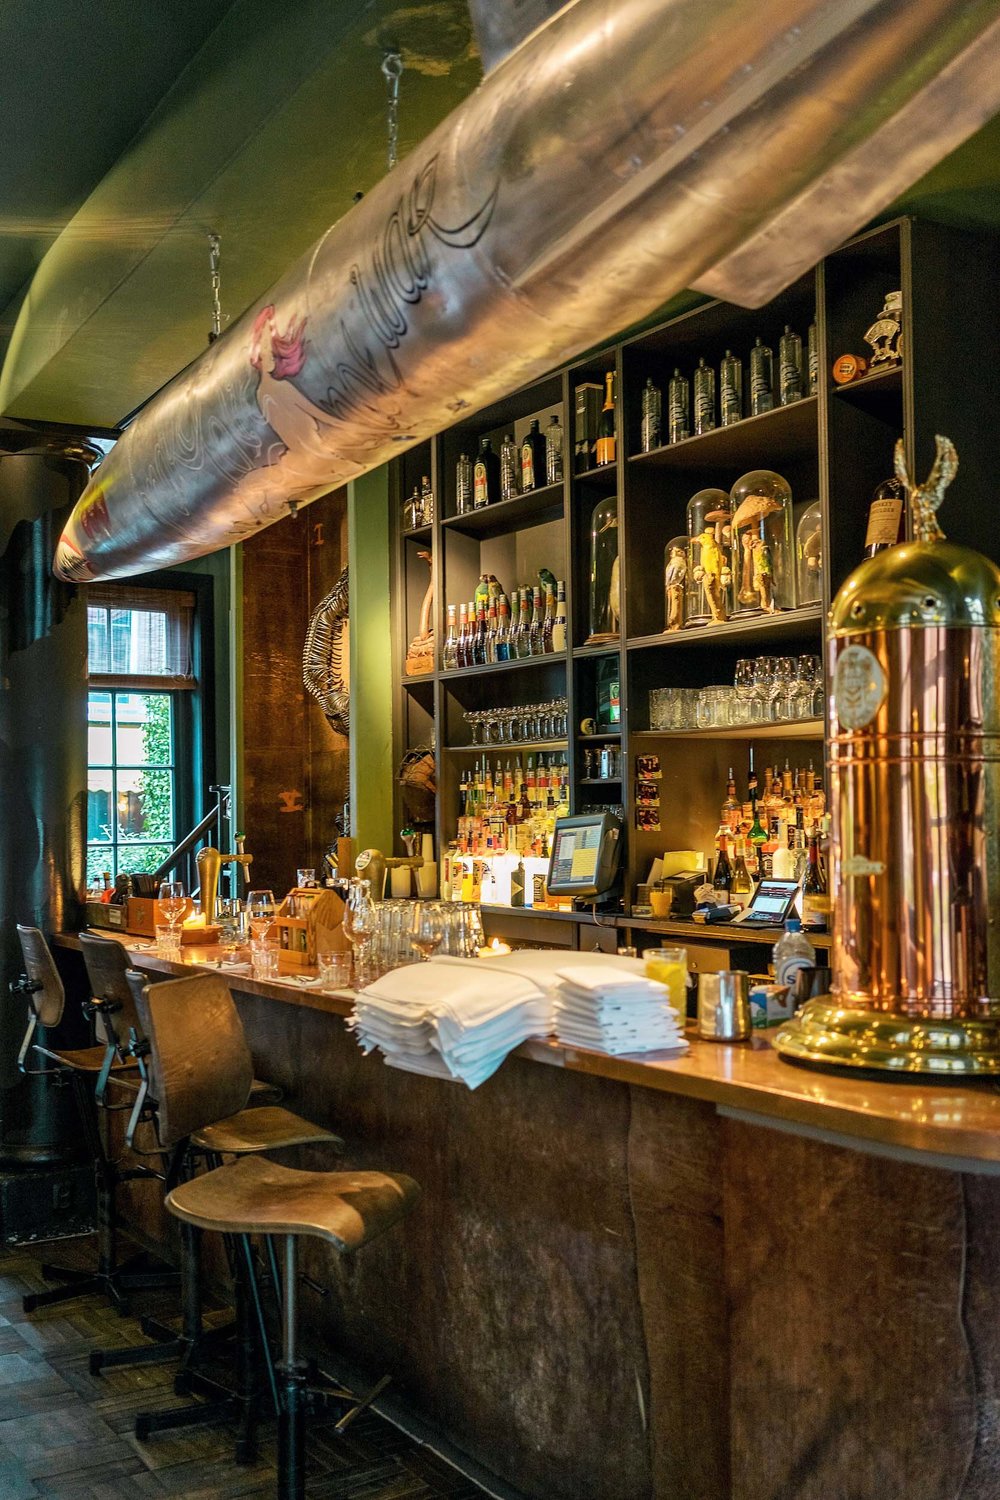 Need a cocktail break in your Amsterdam itinerary? Visit Lion Noir